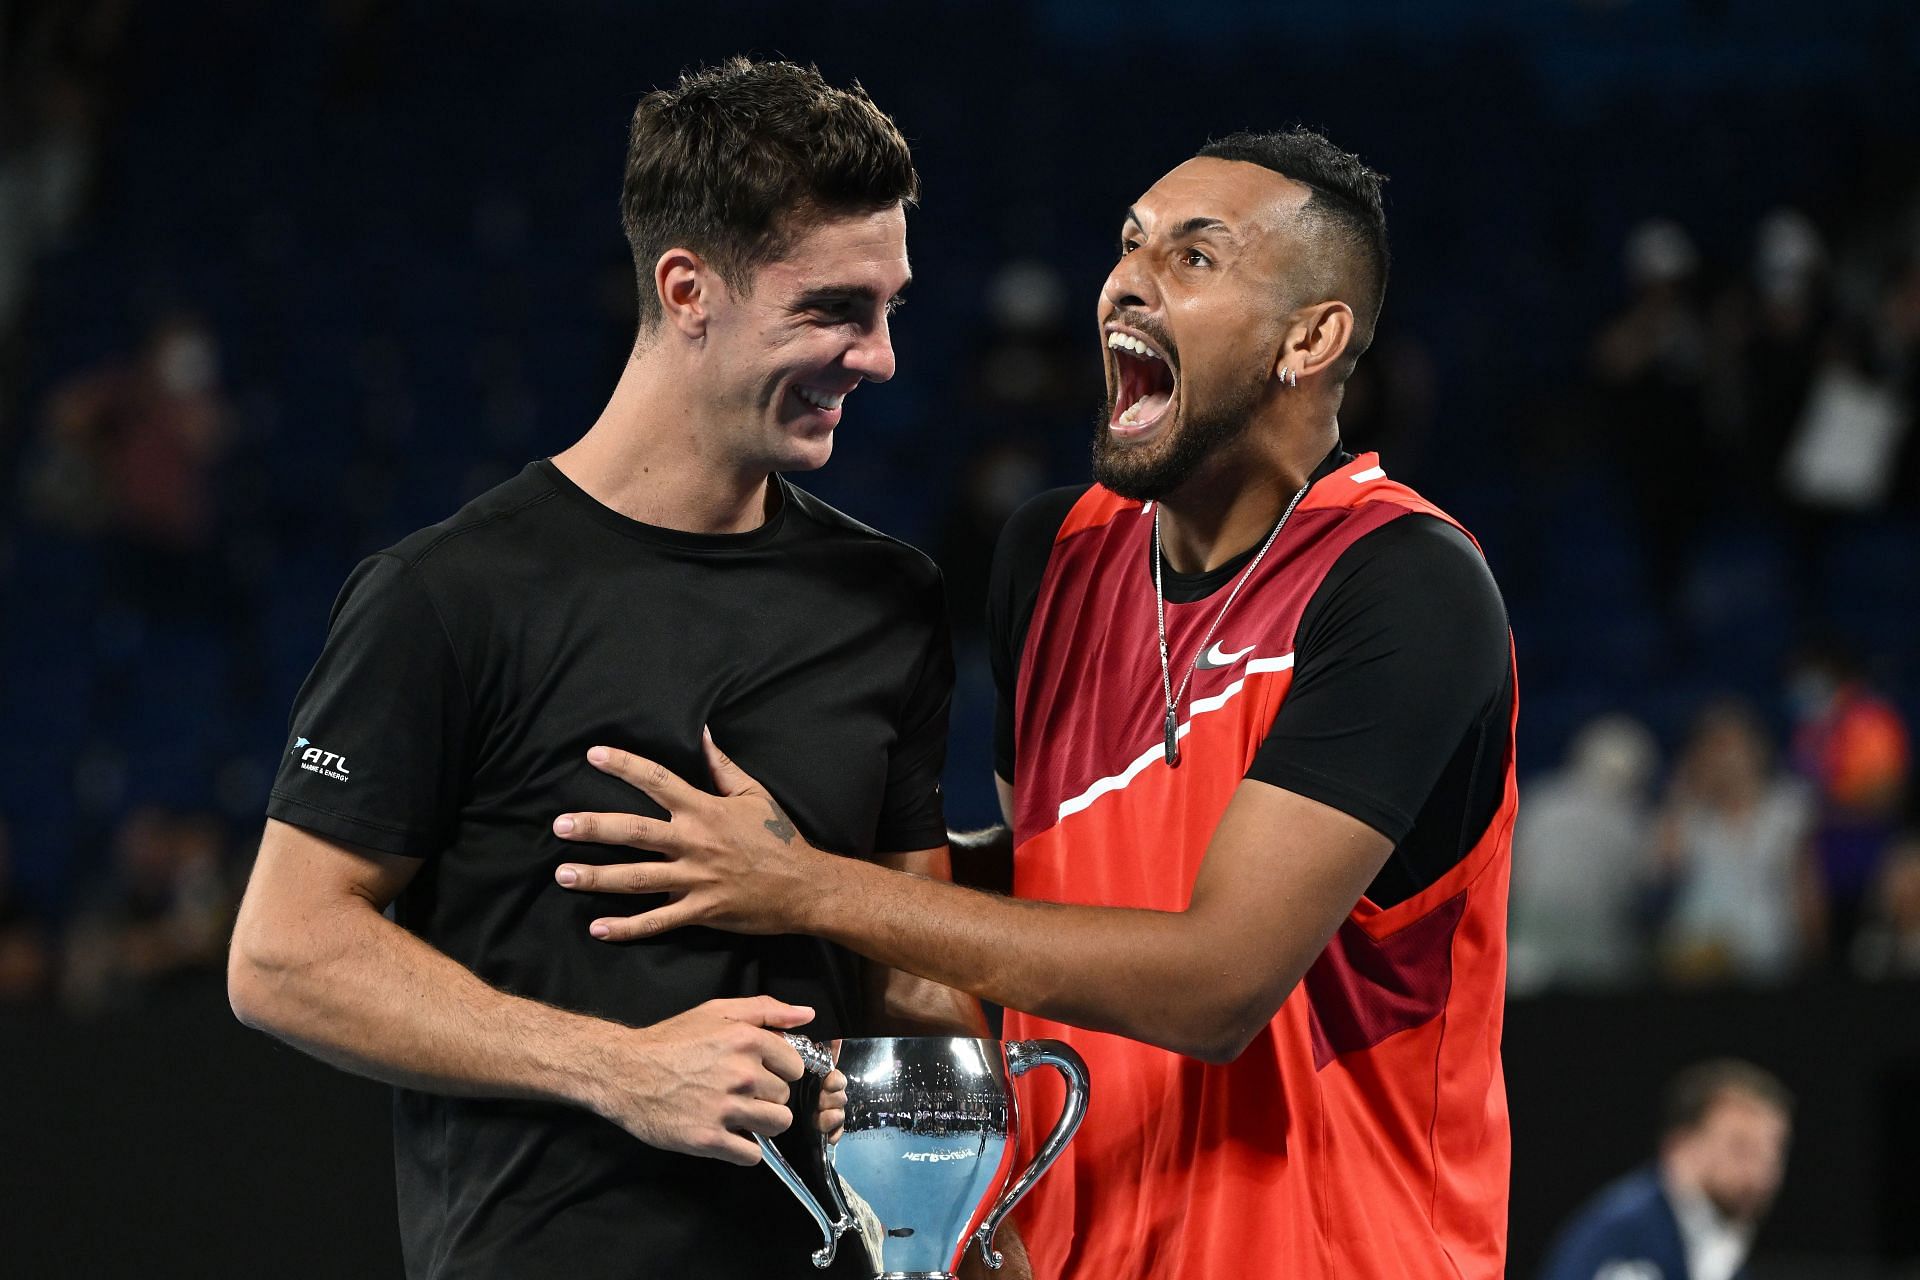 Thanasi Kokkinakis and Nick Kyrgios with the 2022 Australian Open doubles title